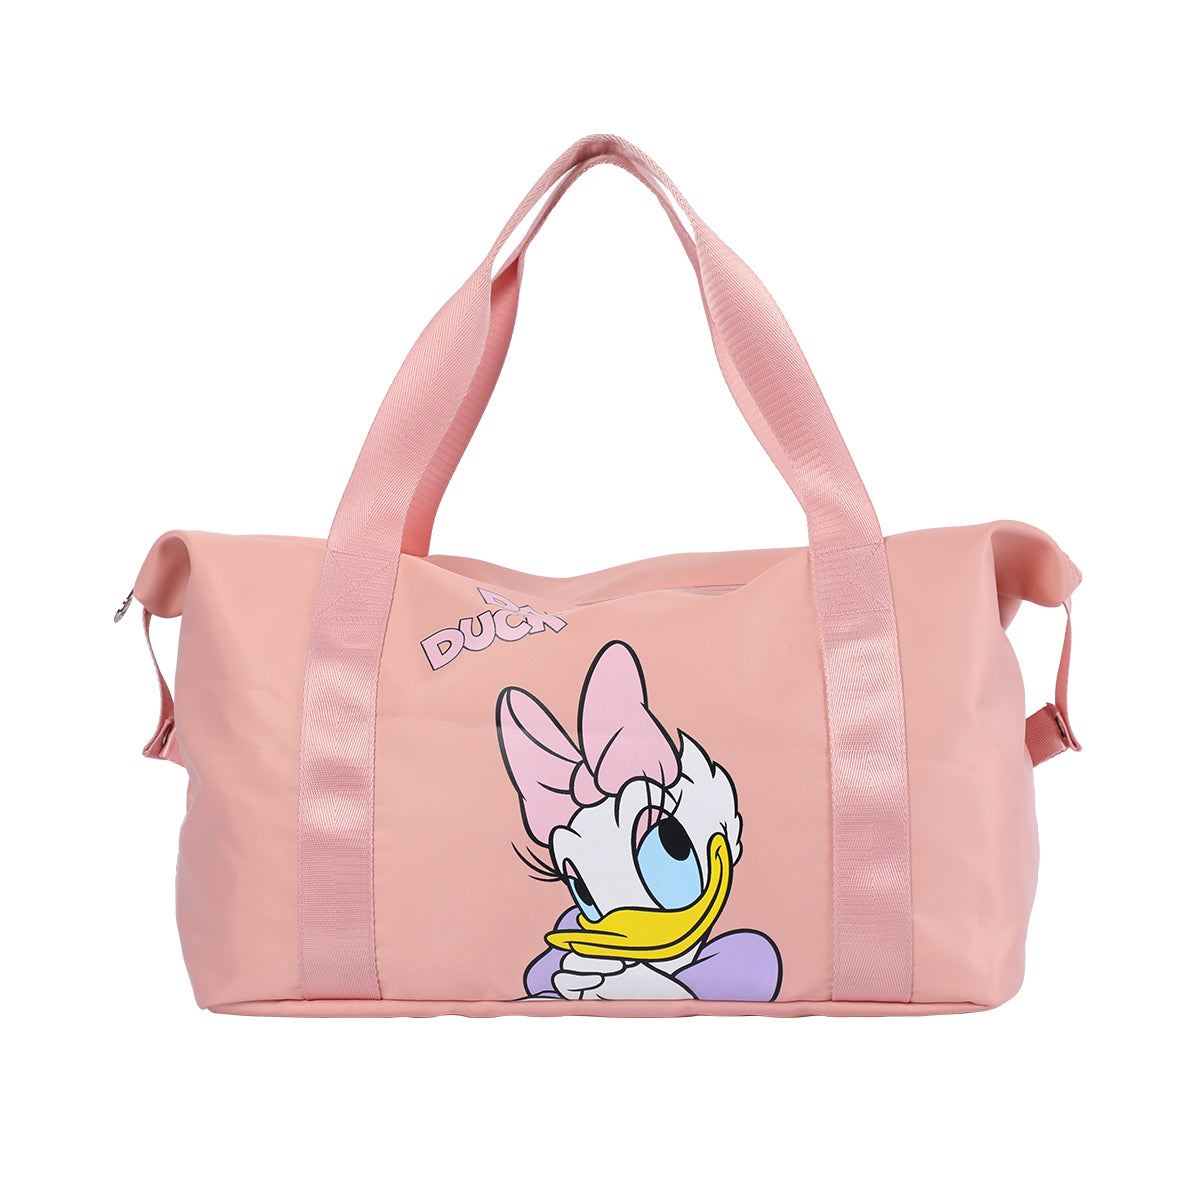 Disney Daisy Donald Duck Carry And Shoulder Bag For Travel 21412